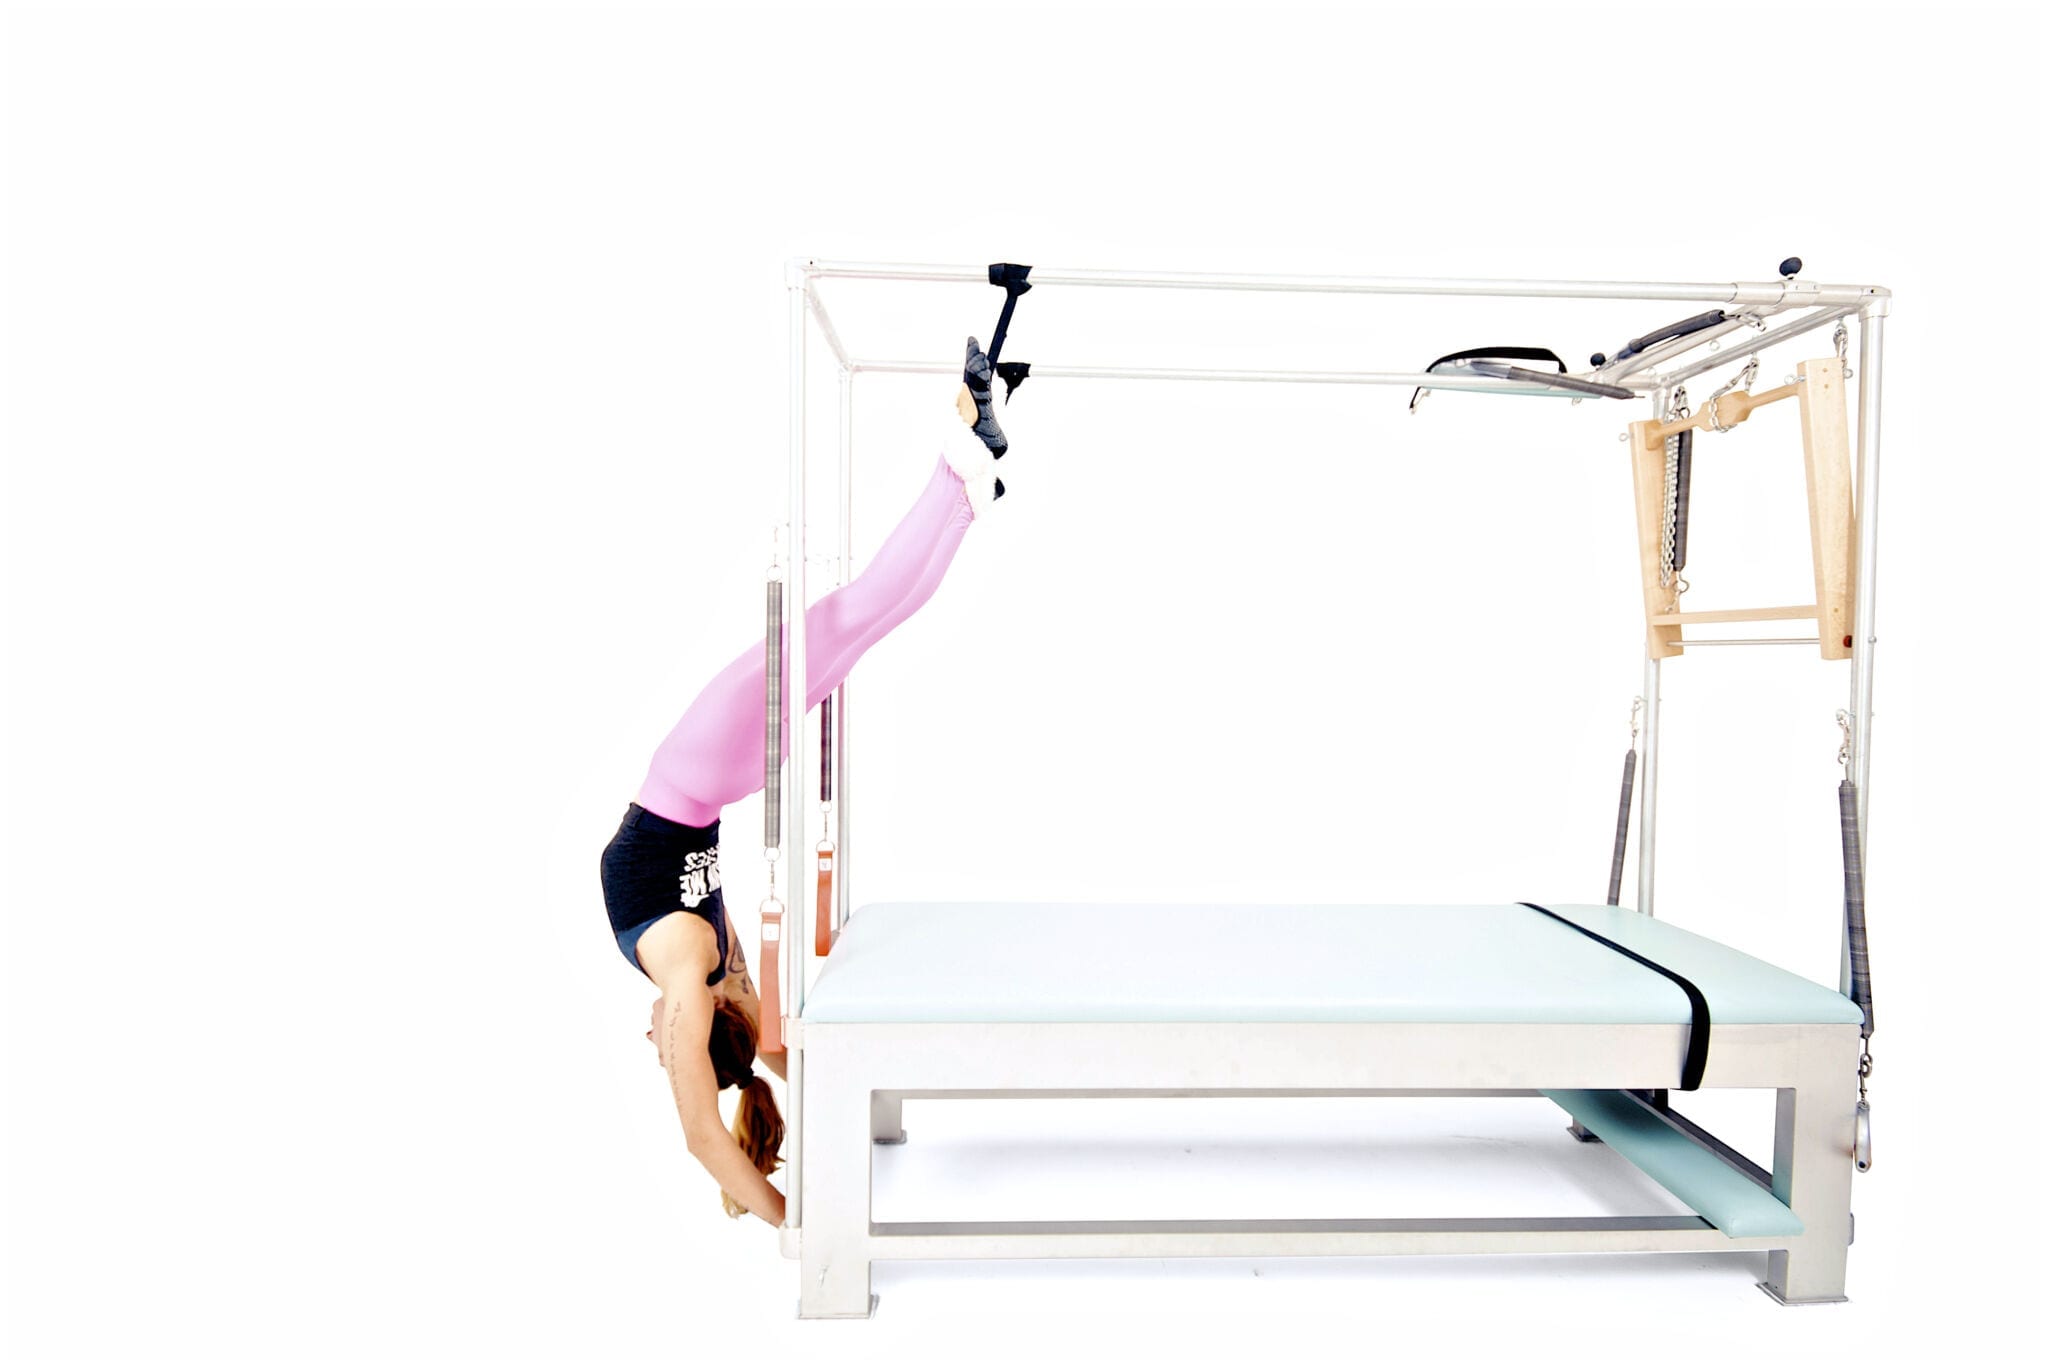 Half-and-Full-Hanging-on-the-Cadillac-Online-Pilates-Classes-scaled